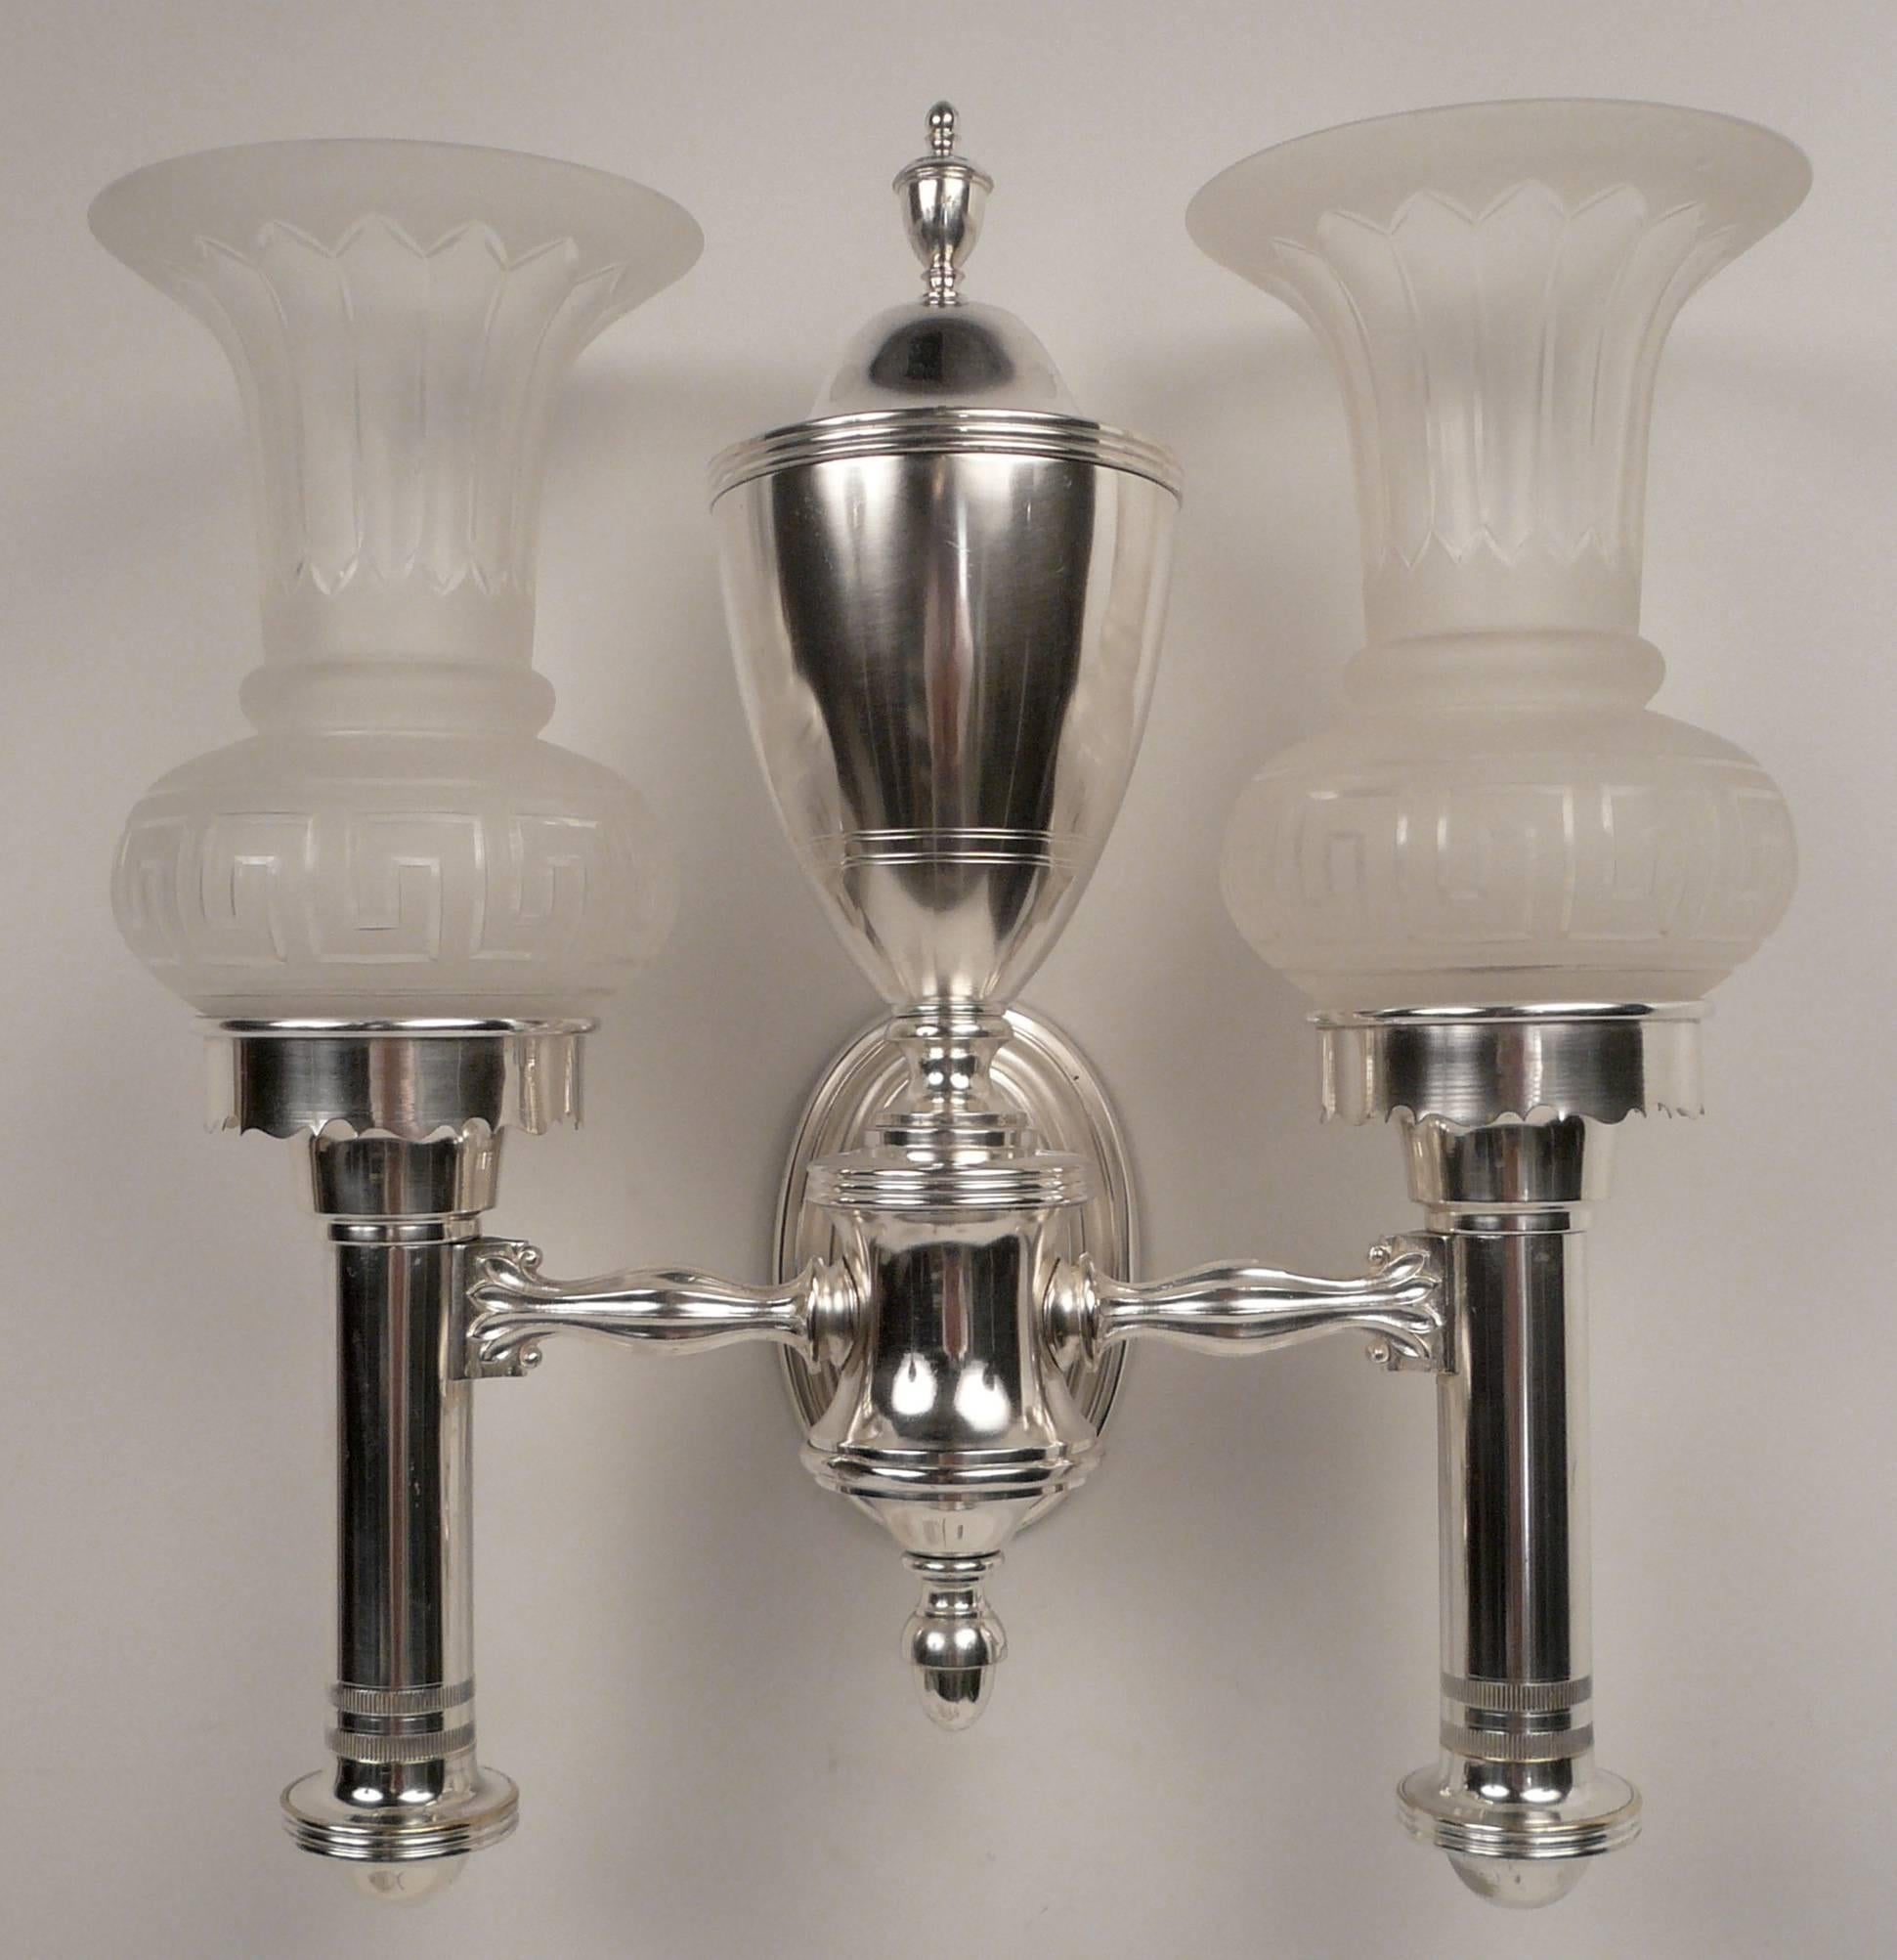 This handsome set of four silver plated sconces are beautifully crafted and date from the early 20th century.